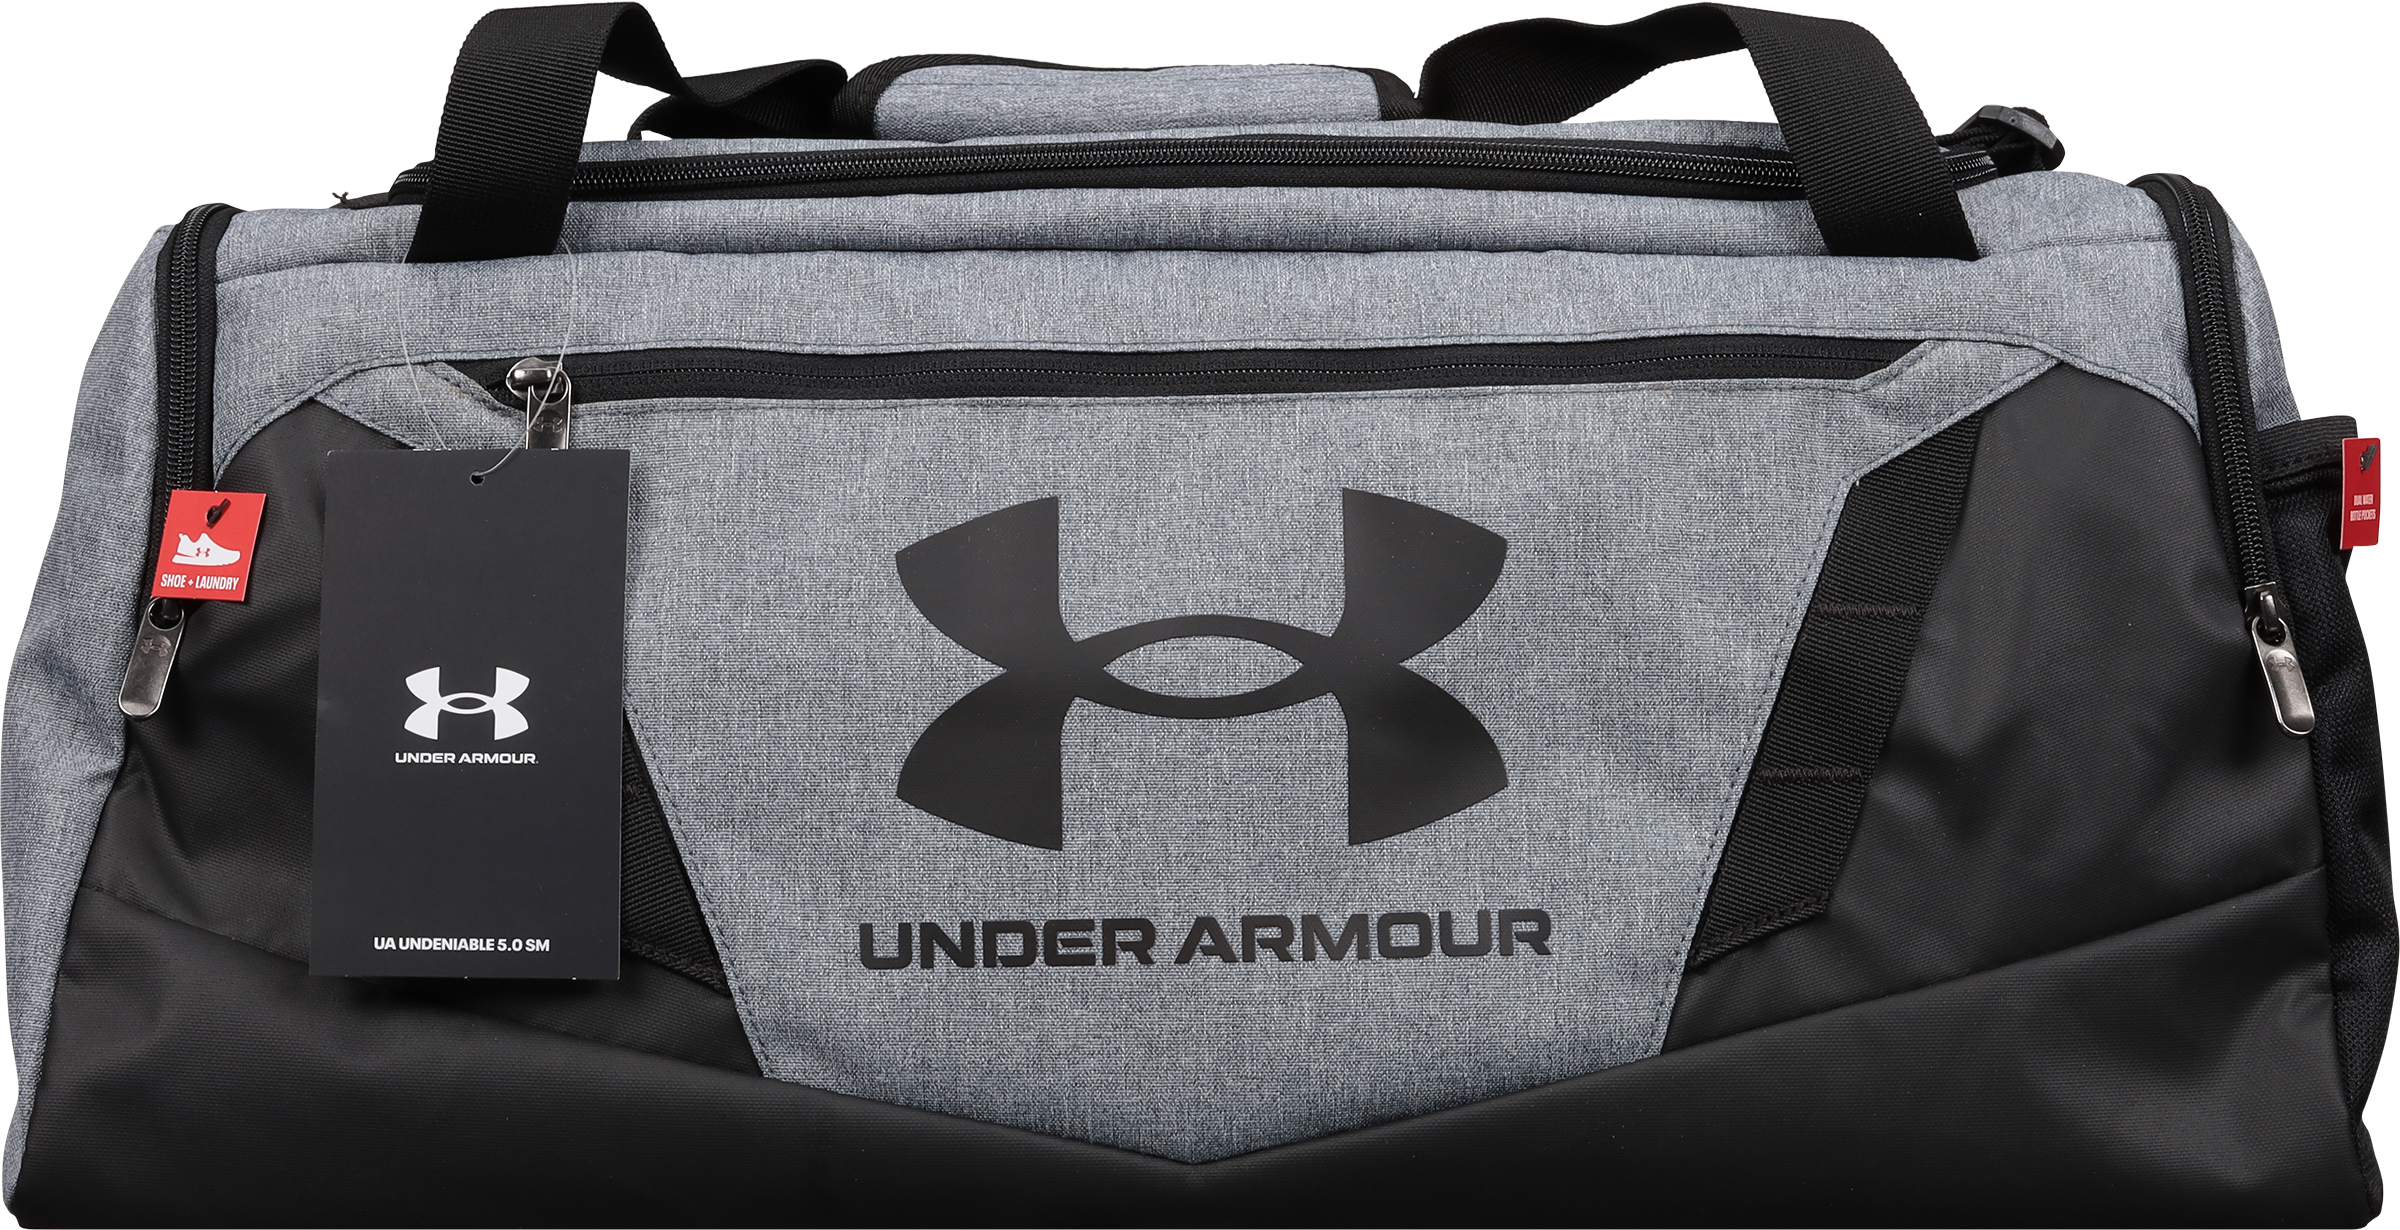 Under Armour Undeniable 5.0 Duffle - image 1 of 2